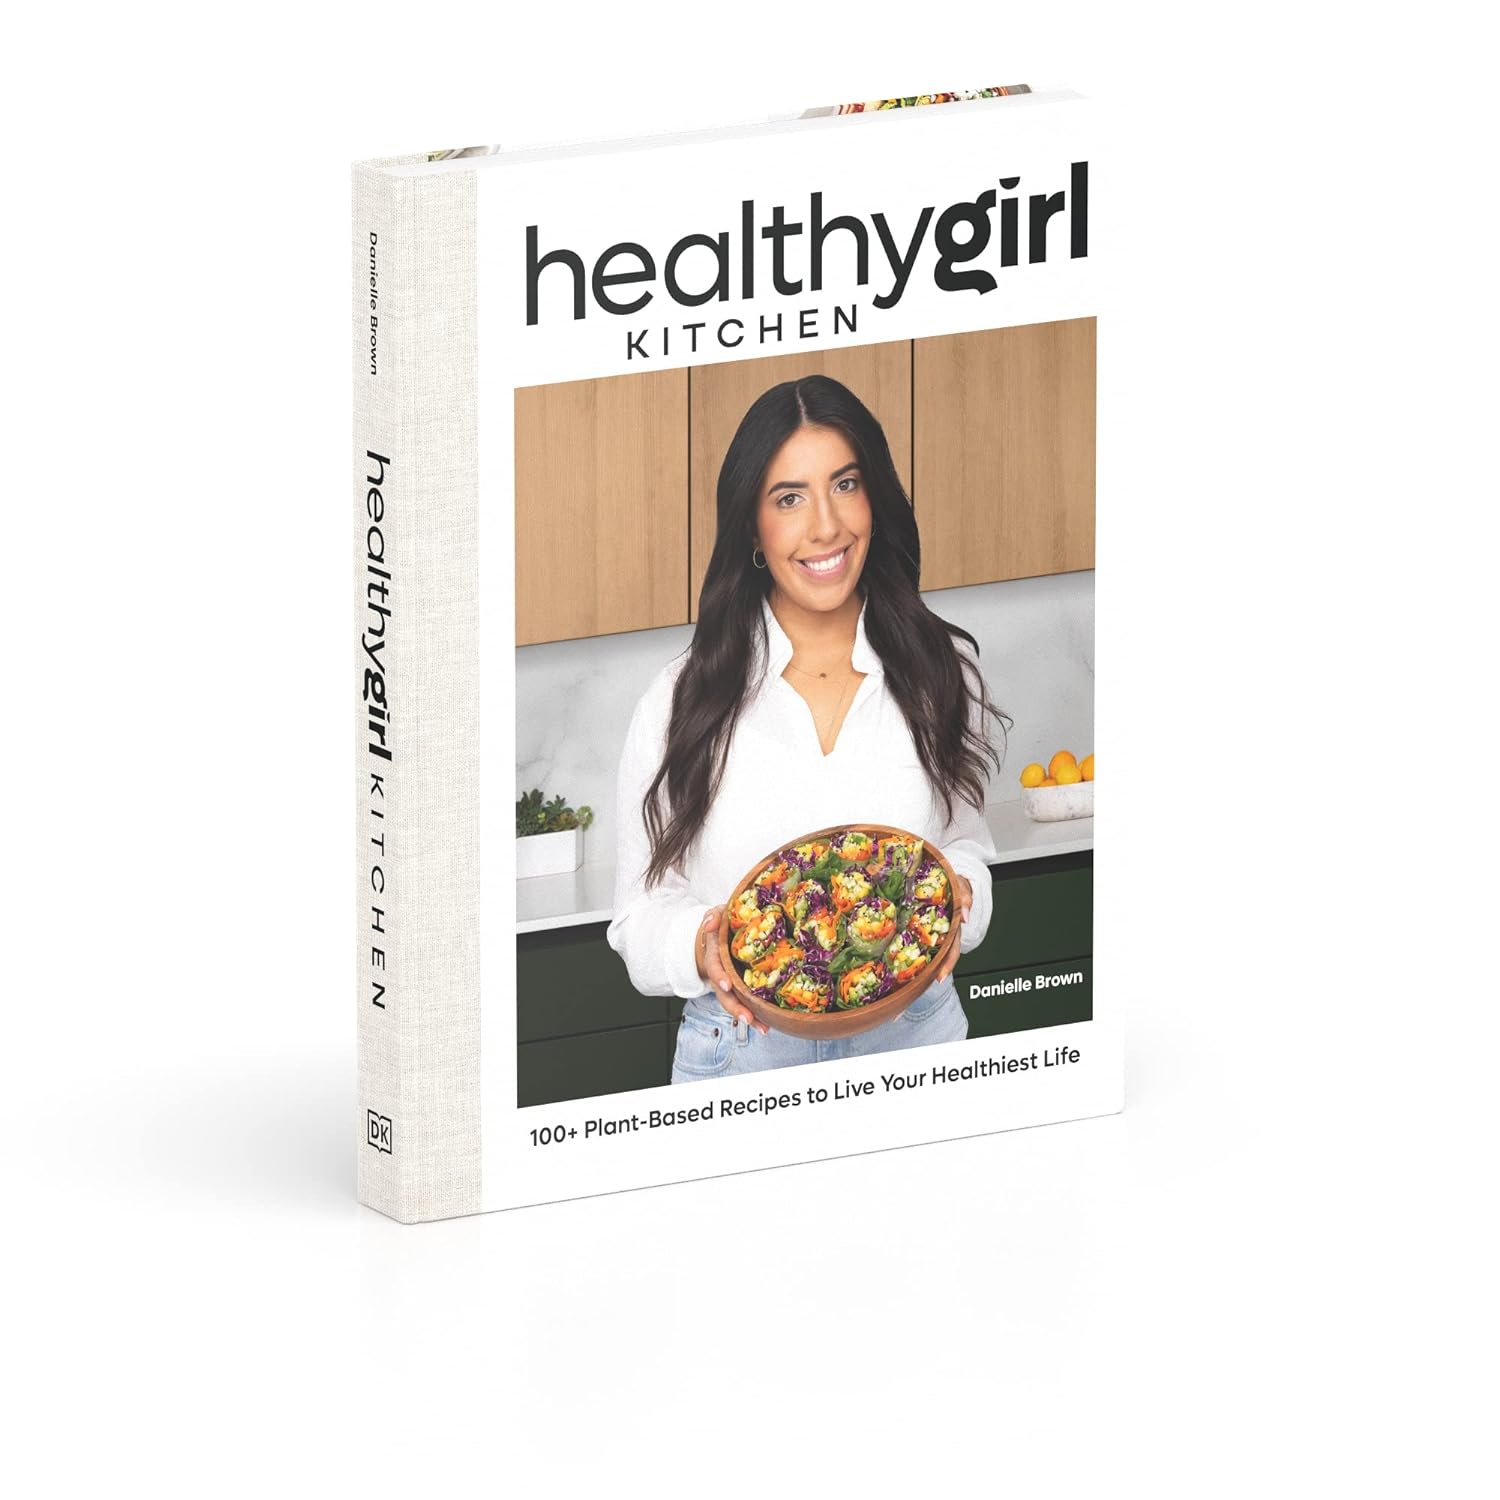 HealthyGirl Kitchen: 100+ Plant-Based Recipes to Live Your Healthiest Life